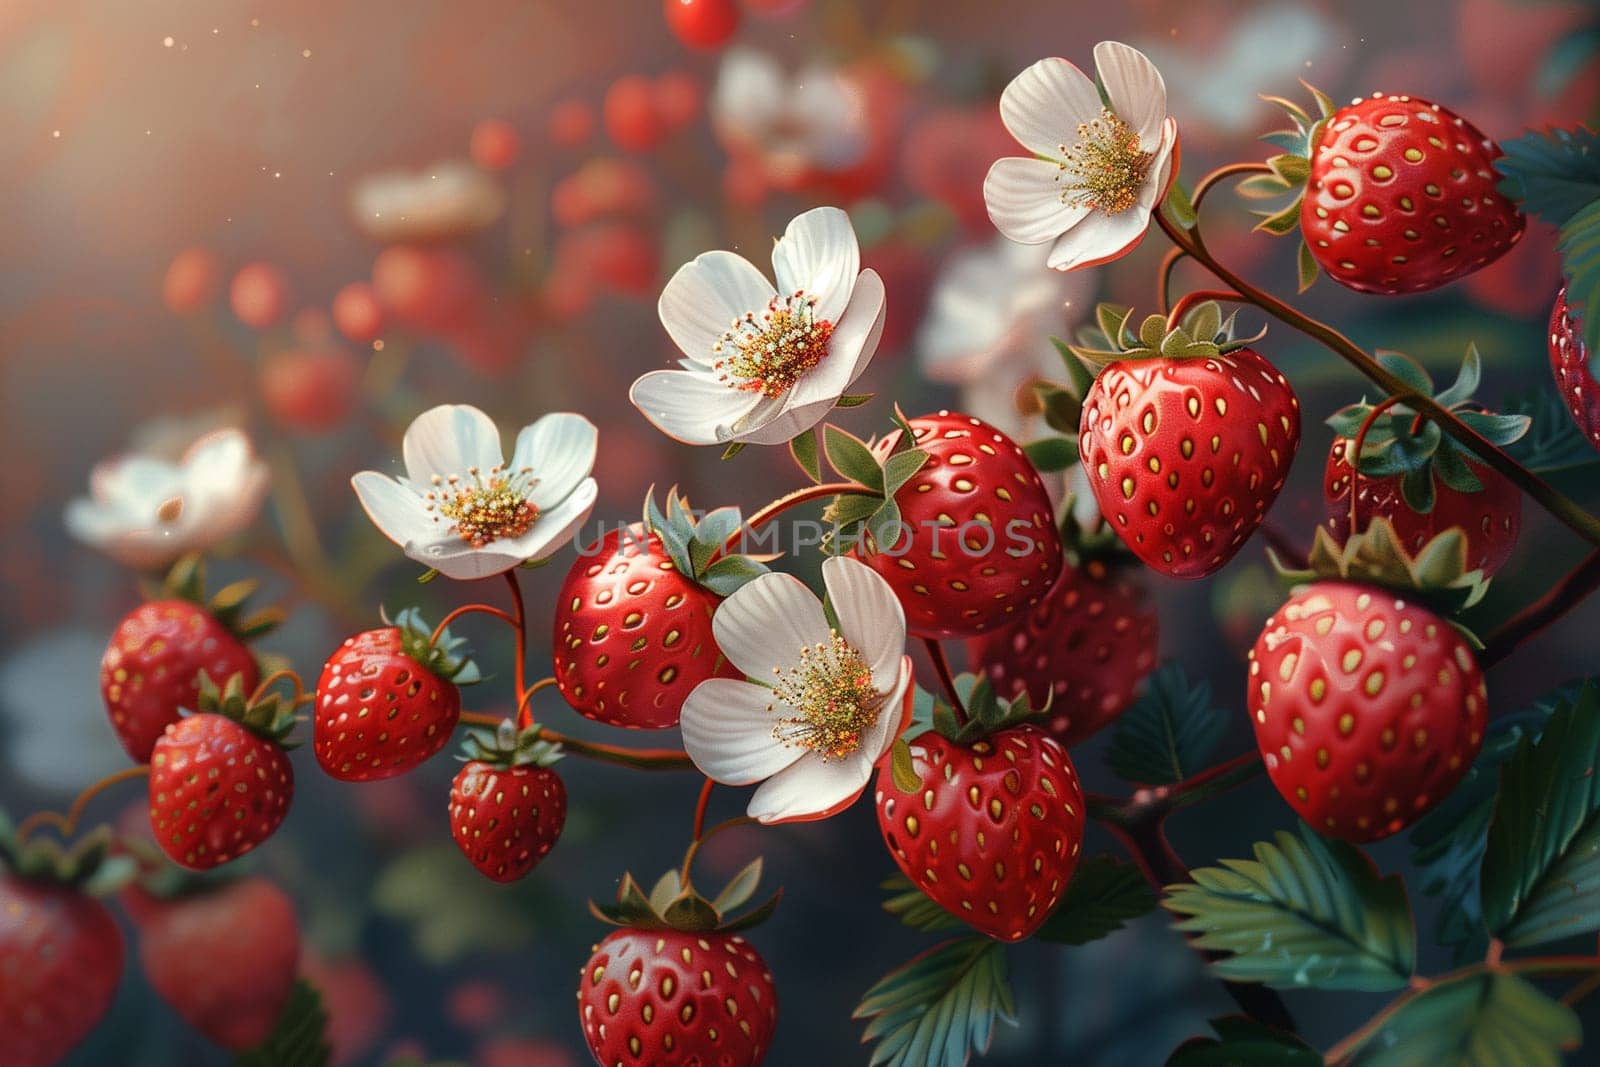 A bunch of ripe strawberries with green leaves in the foreground, set against a soft focus of white flowers in the background.